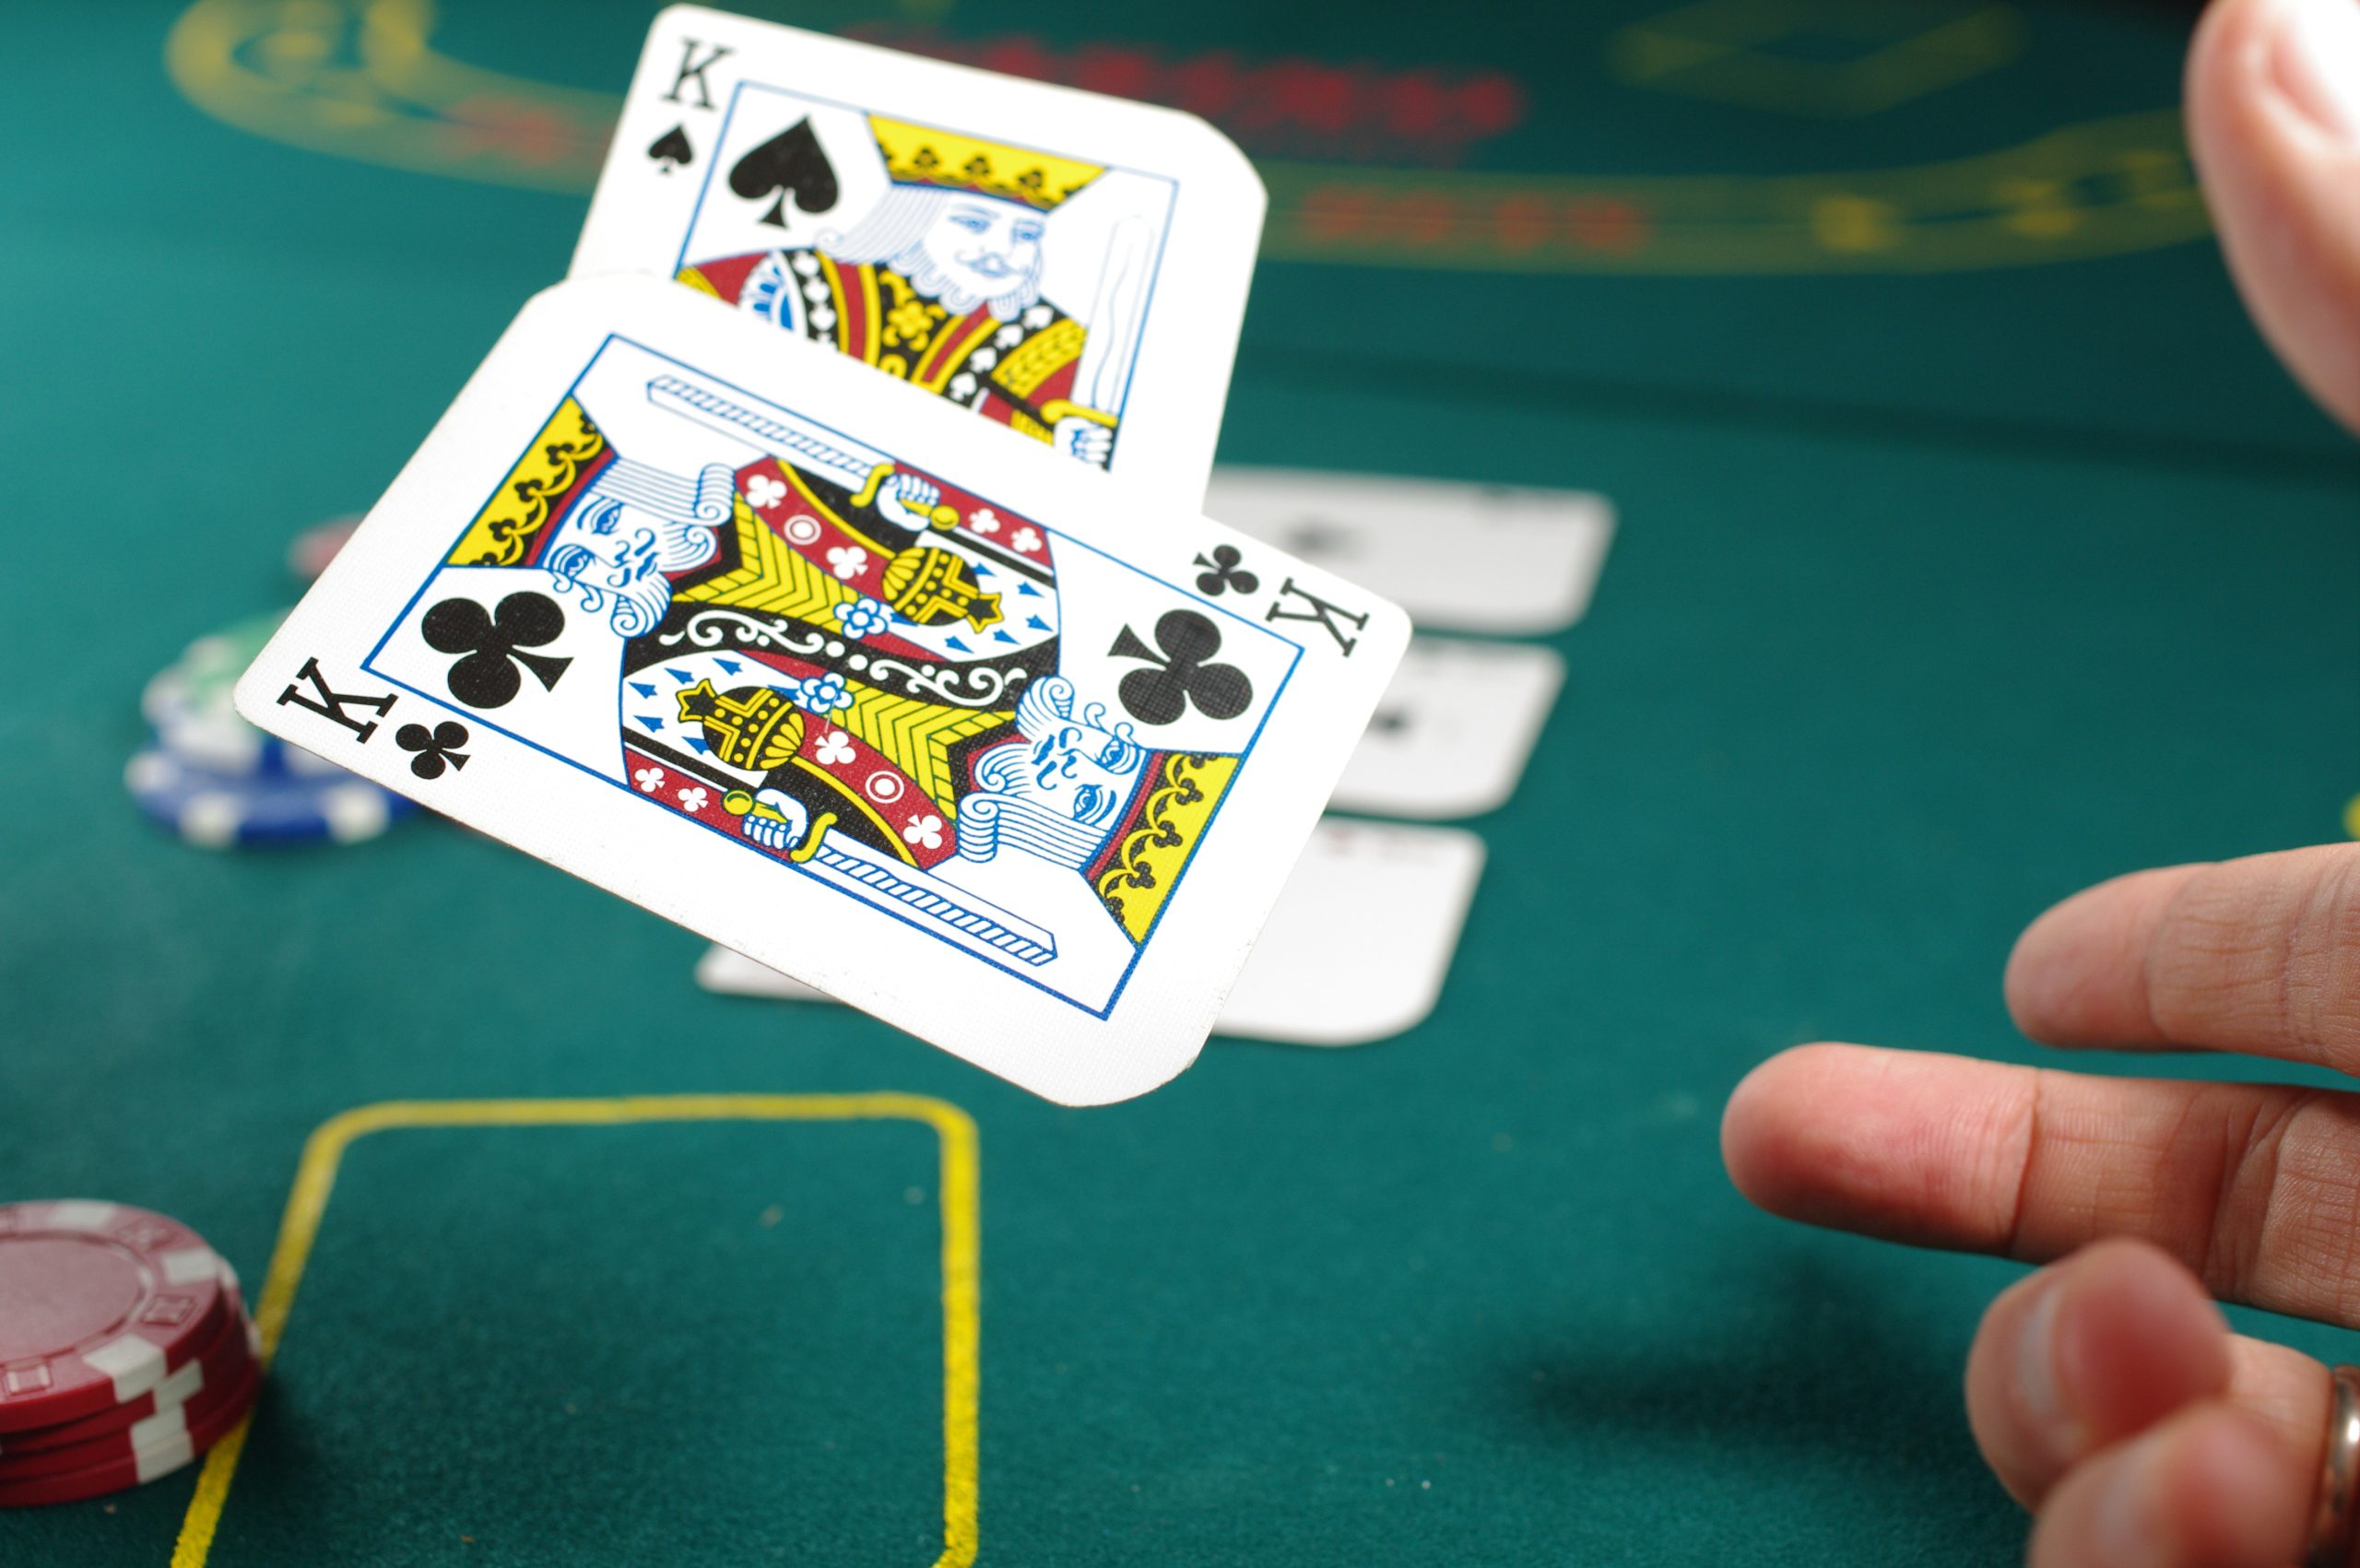 There are a number of benefits that come with playing at an online casino